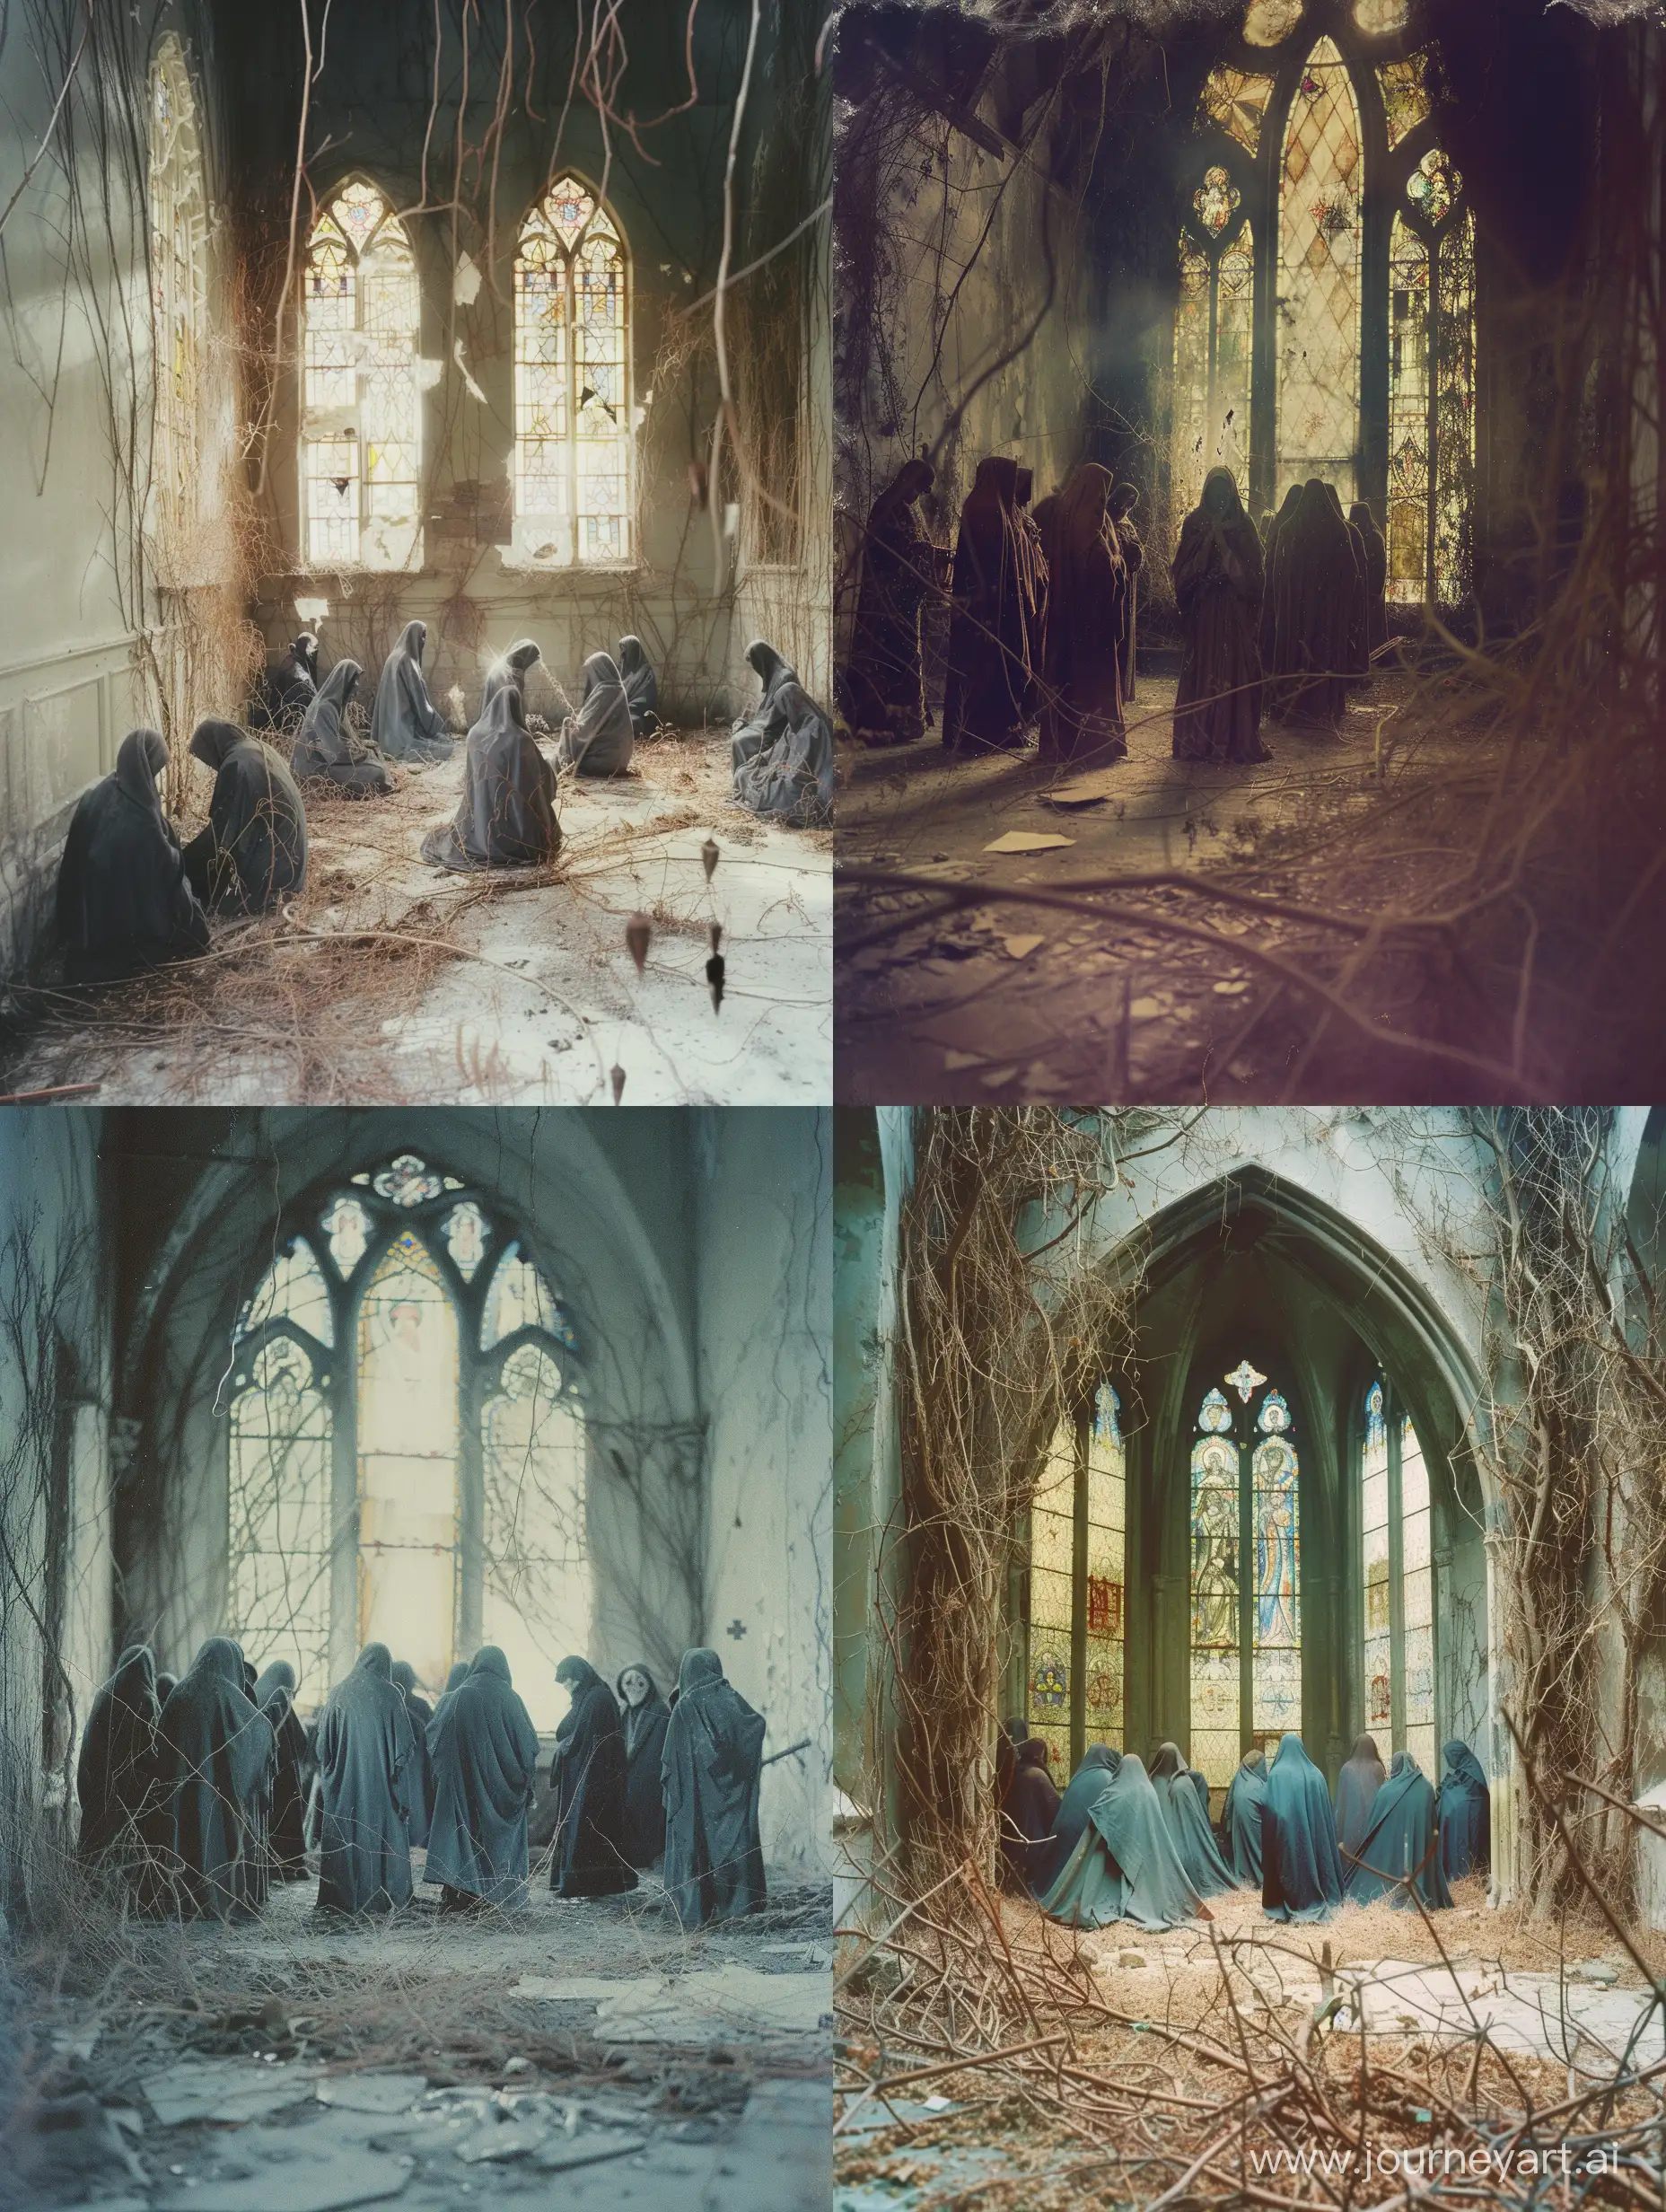 A color photo of an abandoned church, its stained glass windows shattered and overgrown with thorny vines. Within the dilapidated walls, a congregation of shadowy figures clad in tattered robes engage in a twisted ritual, their voices blending with the howling wind. The air crackles with a malevolent energy, revealing glimpses of occult symbols scattered across the floor. Secret keywords: "Veiled Sanctuary," "Cursed Congregation," "Rites of Darkness.” Folk horror, dark folk, occult core, expired 35mm film
